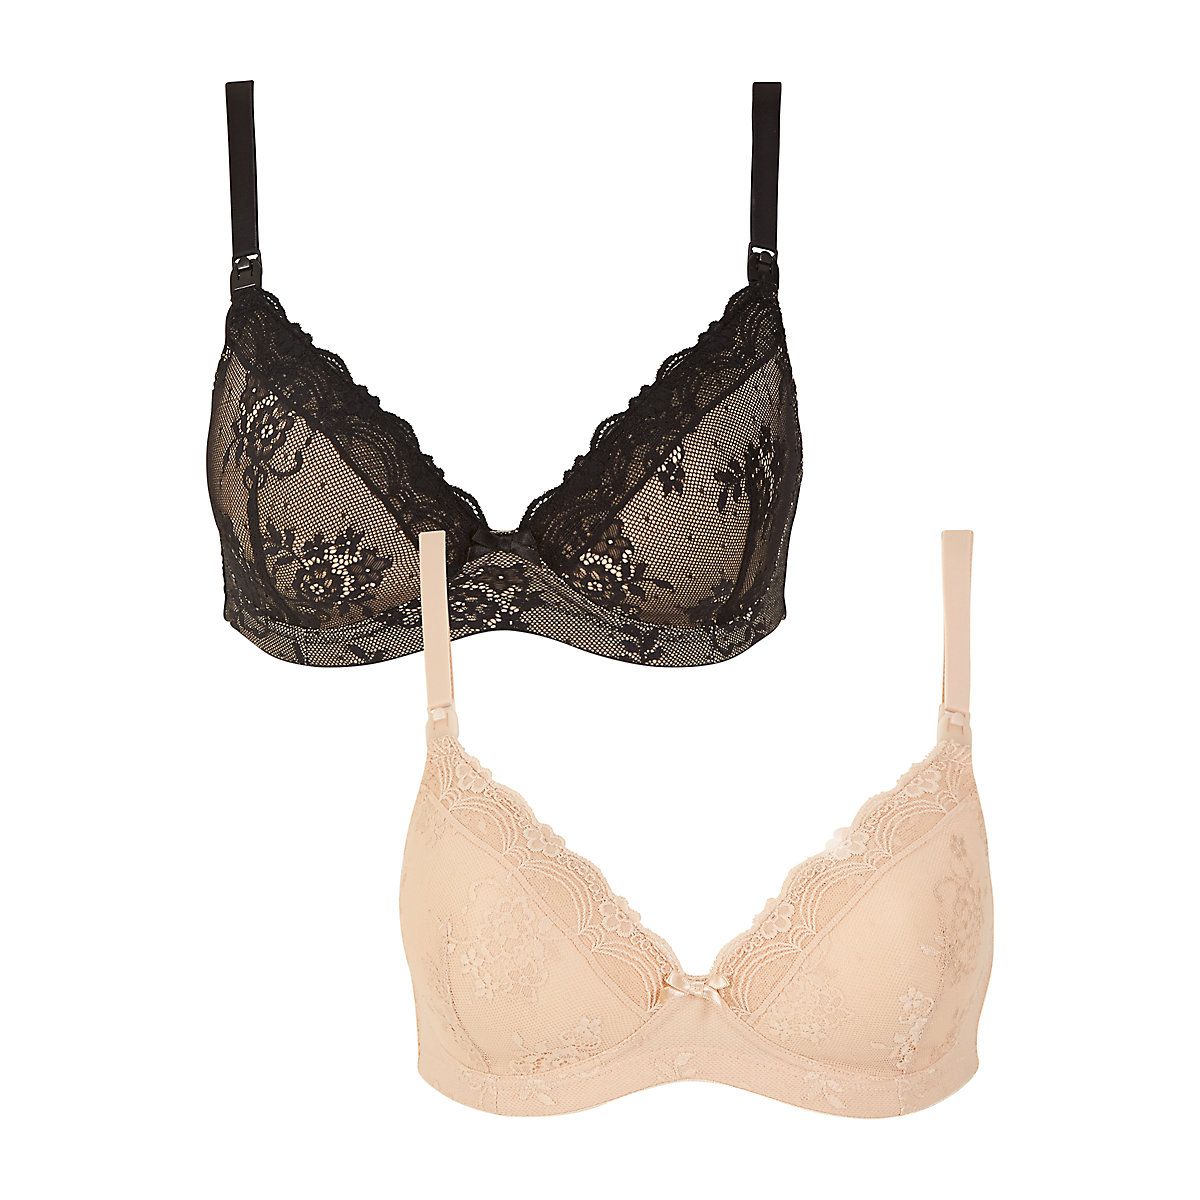 black and nude lace nursing t-shirt bras - 2 pack | Mothercare (UK)